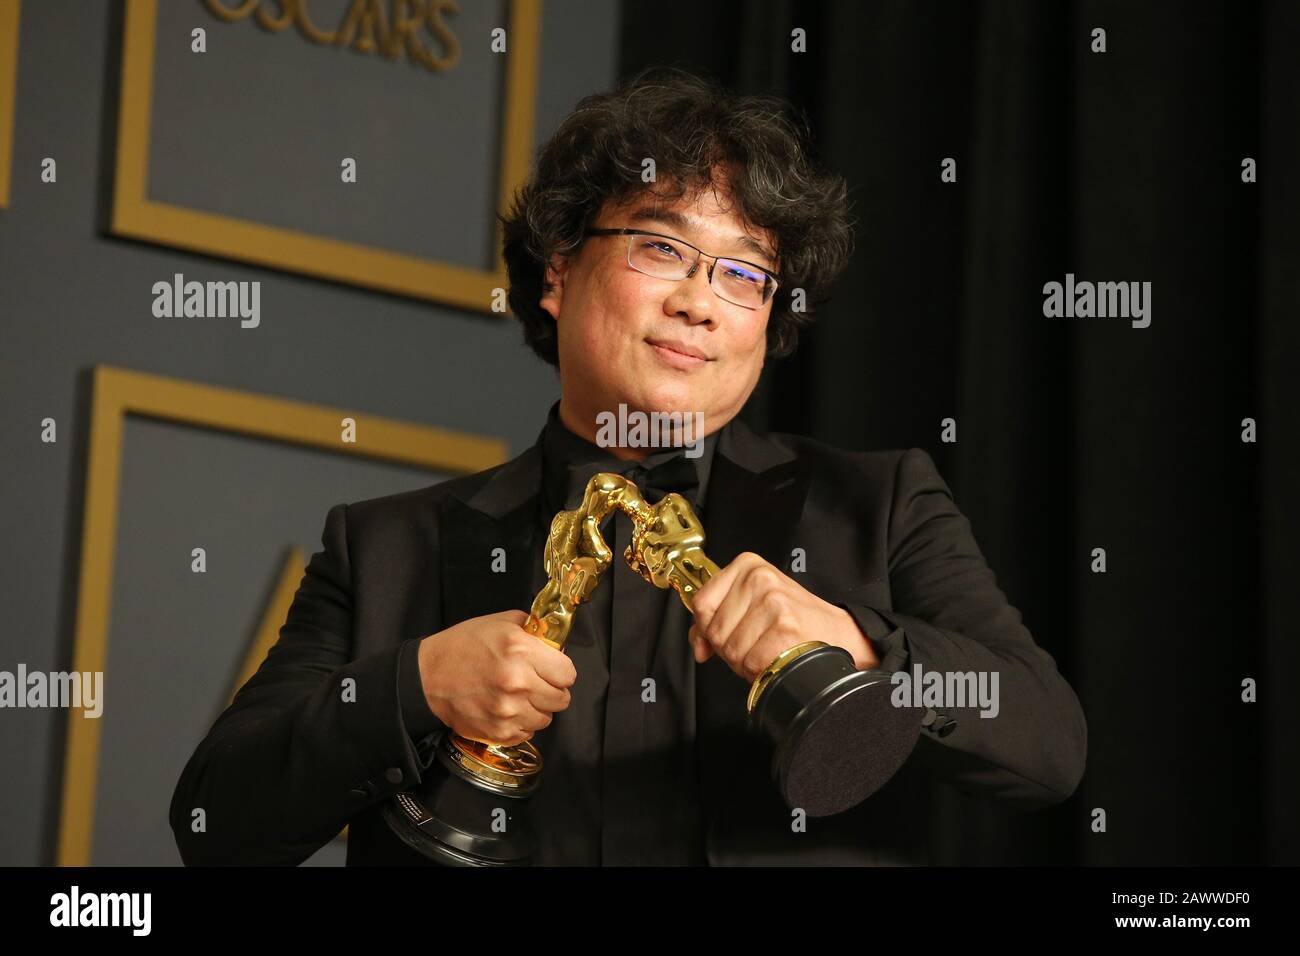 Los Angeles, California, USA. 09th Feb, 2020. ( Bong Joon-ho poses for photos at the 92nd Academy Awards ceremony at the Dolby Theatre in Los Angeles, the United States, Feb. 9, 2020. South Korean black comedy 'Parasite' turned out to be the biggest winner at the 92nd Academy Awards ceremony on Sunday night. Besides nabbing Best Picture, the genre-bending class thriller also won Best Director for Bong Joon-ho, Best International Feature Film and Best Original Screenplay. Credit: Xinhua/Alamy Live News Stock Photo